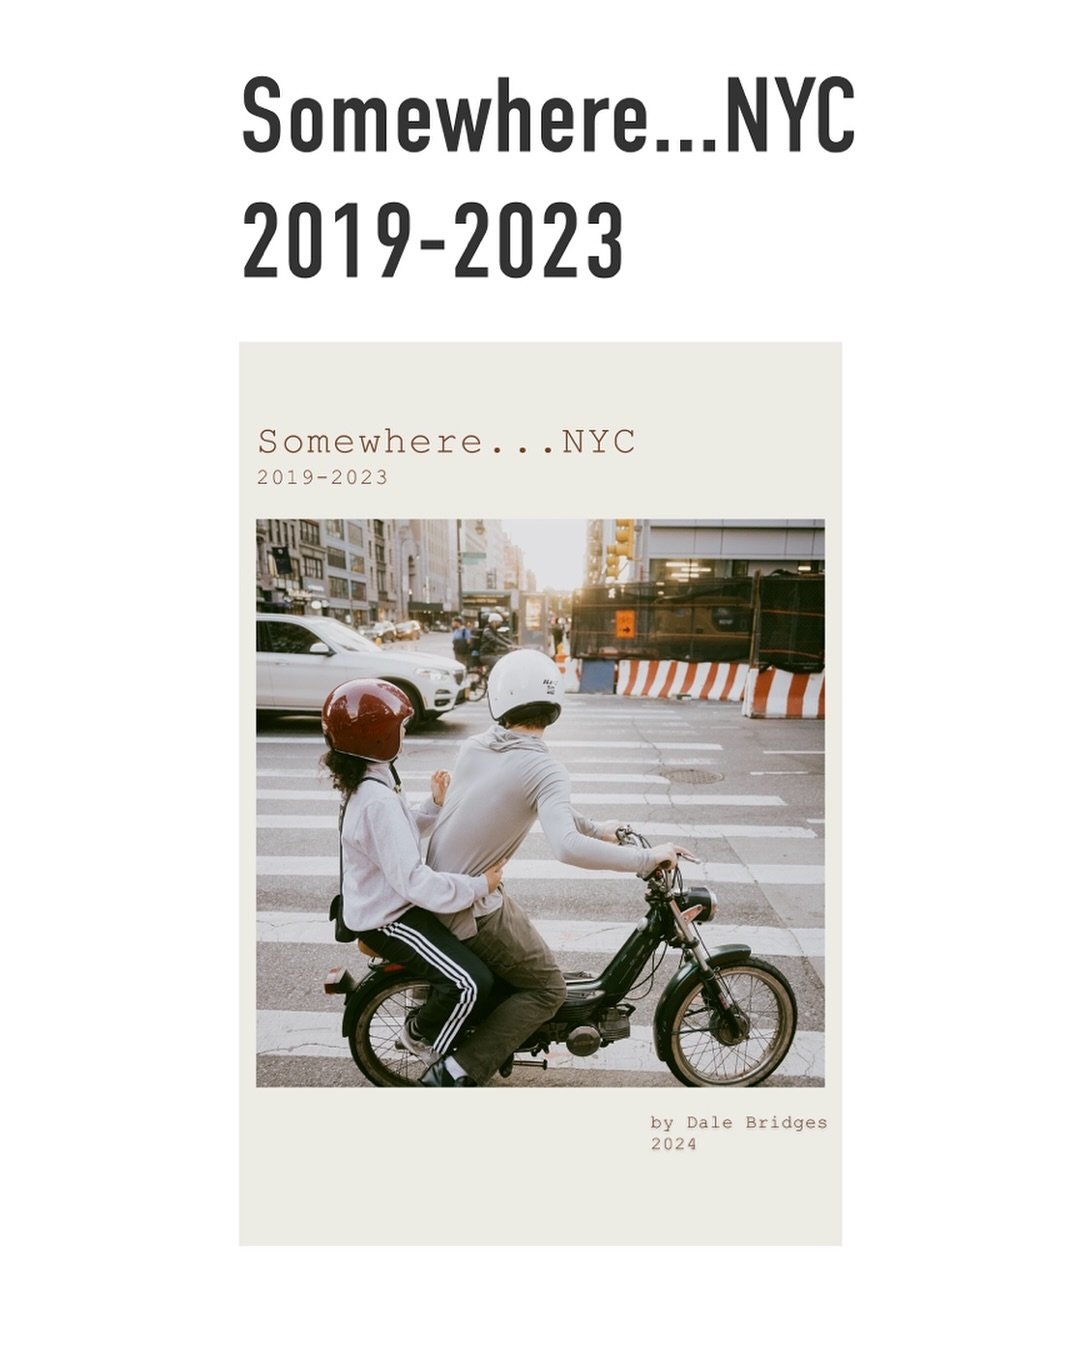 My digital zine is now available for $10. Featuring an edited selection of NYC street photography from 2019-2023. Link to buy is in my bio
&bull;
&bull;
&bull;
#zine #zinerelease #book #bookrelease #street #streetzine #photozine #photobook